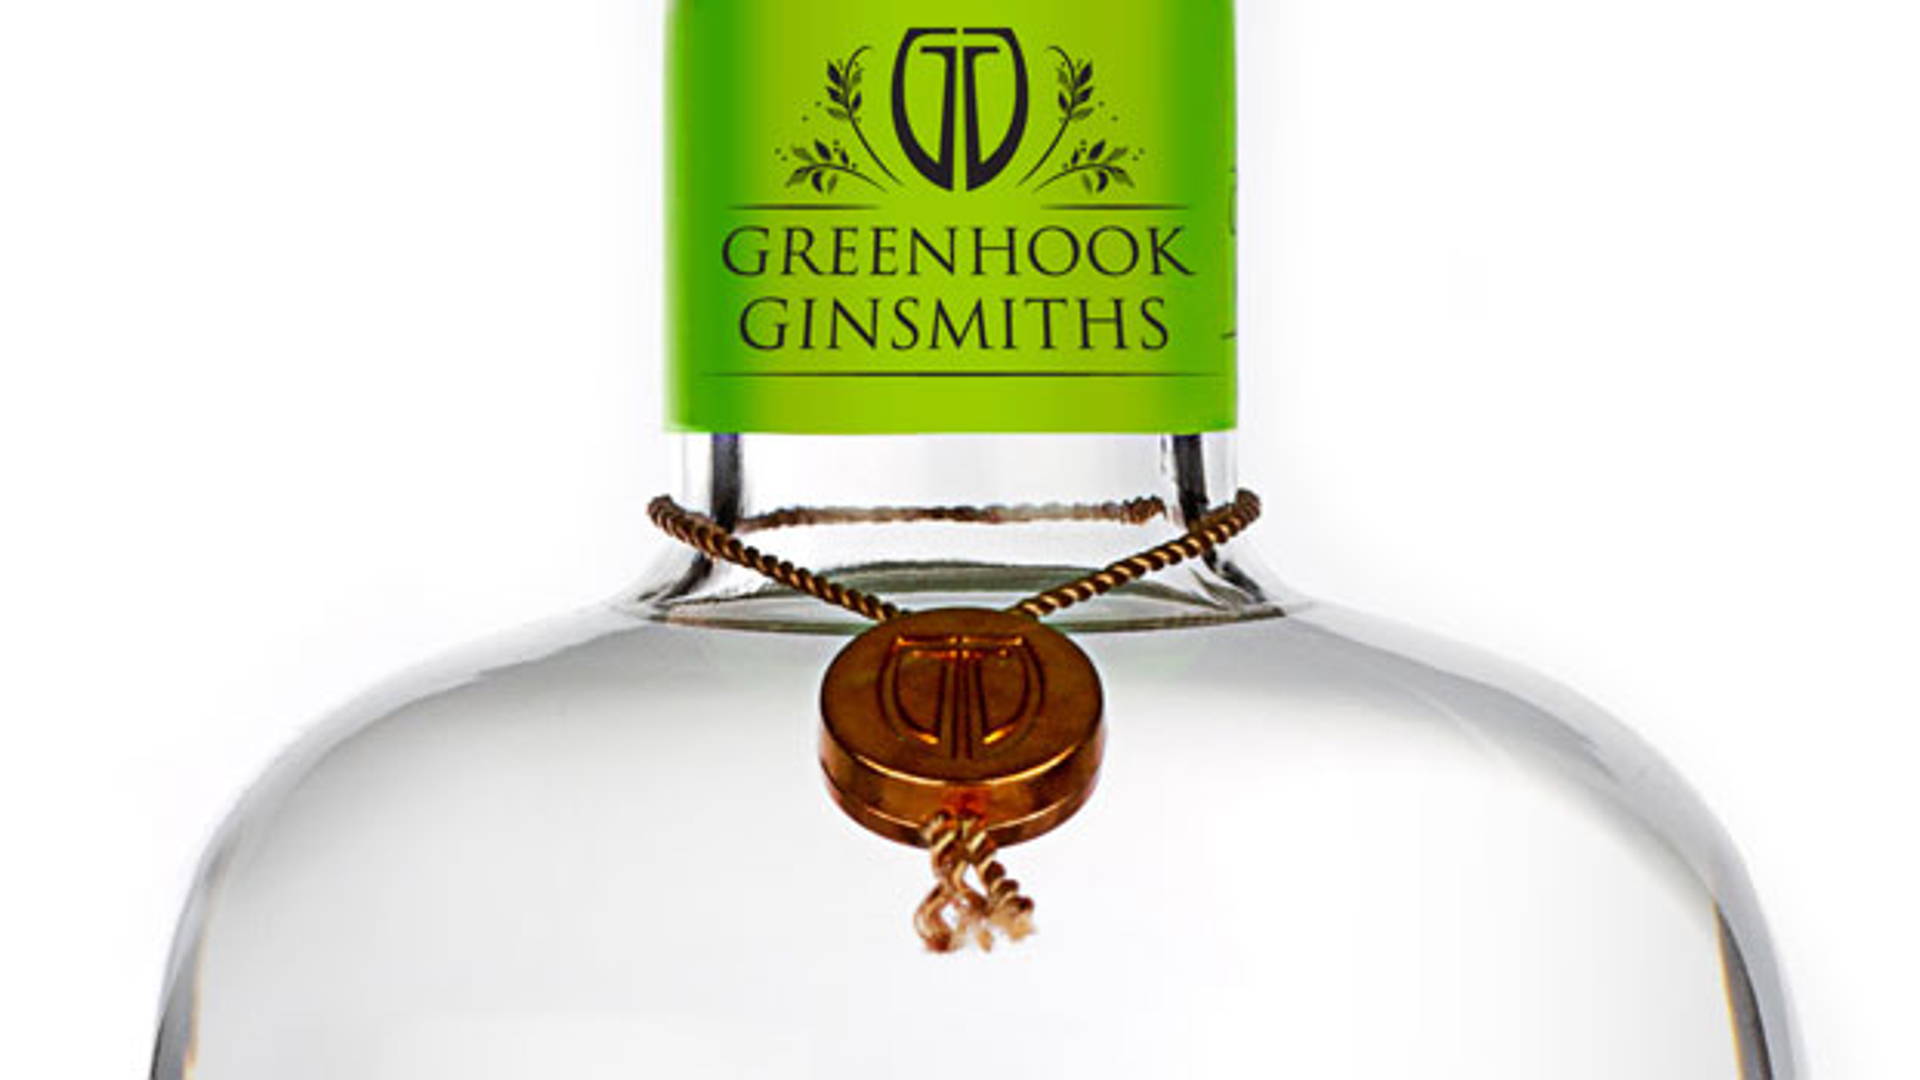 Featured image for Greenhook Ginsmiths American Dry Gin and Beach Plum Gin Liqueur